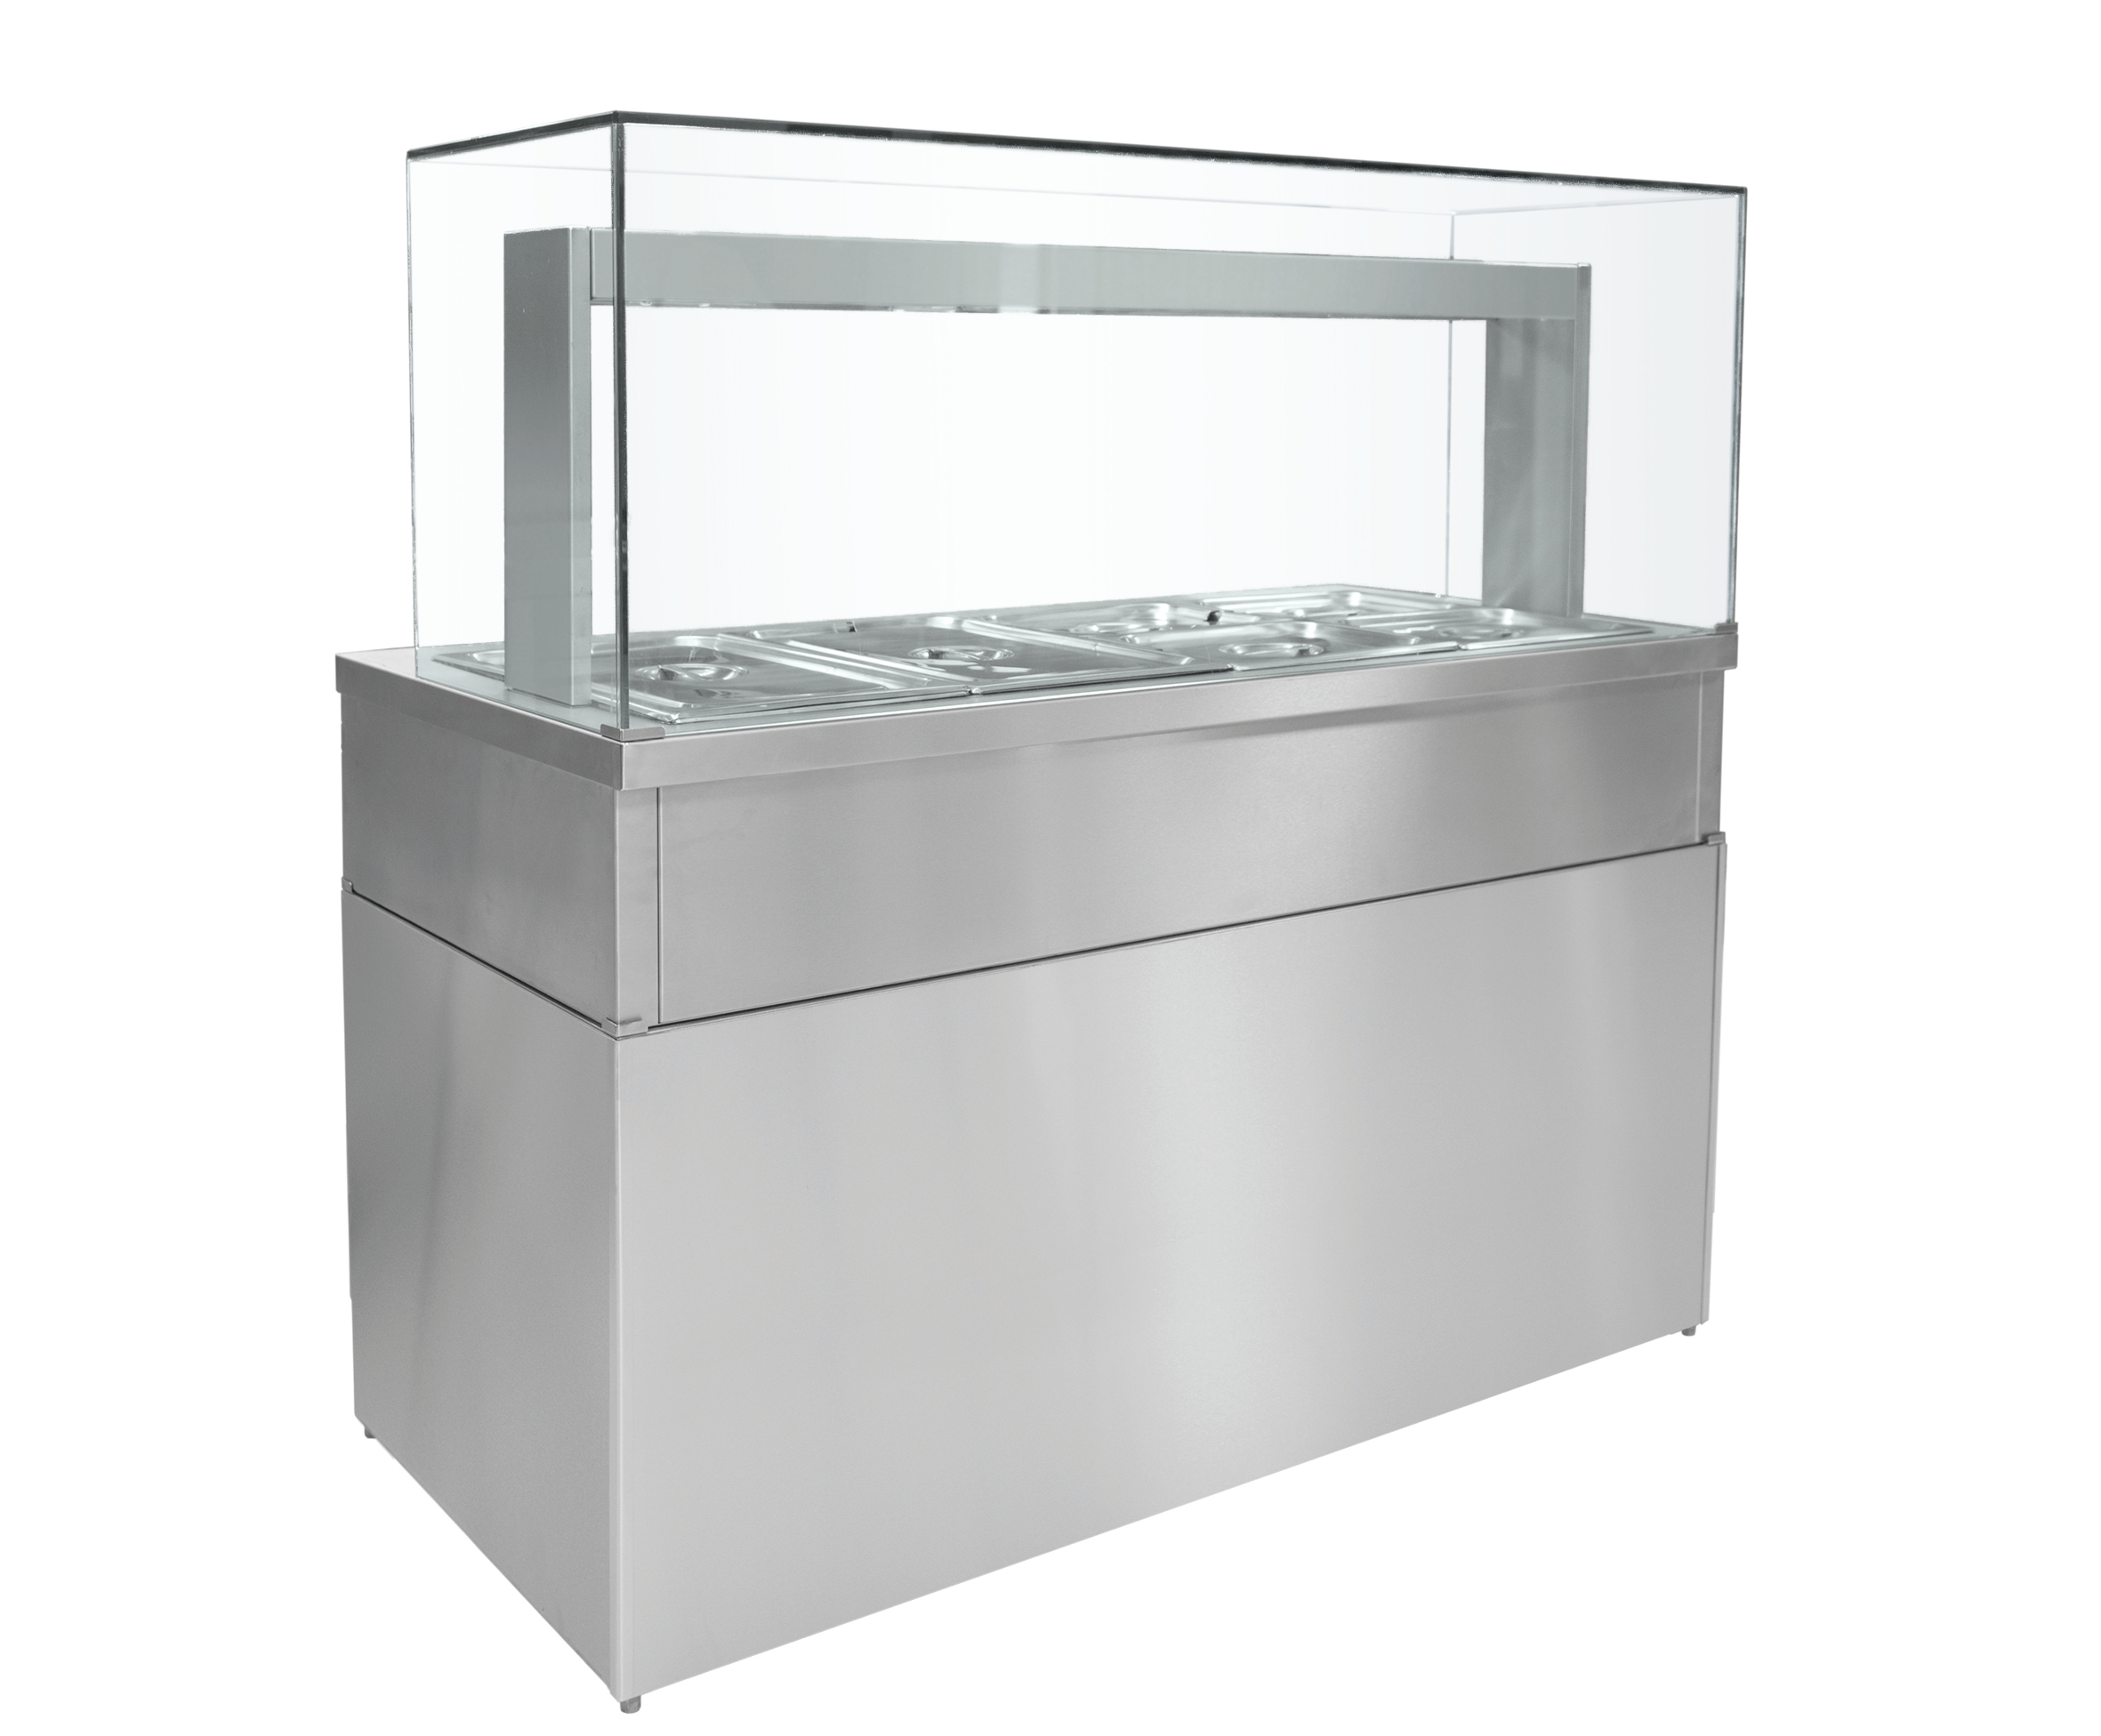 Parry Heated Bain Marie 4 Pot Servery with Glass HGBM4